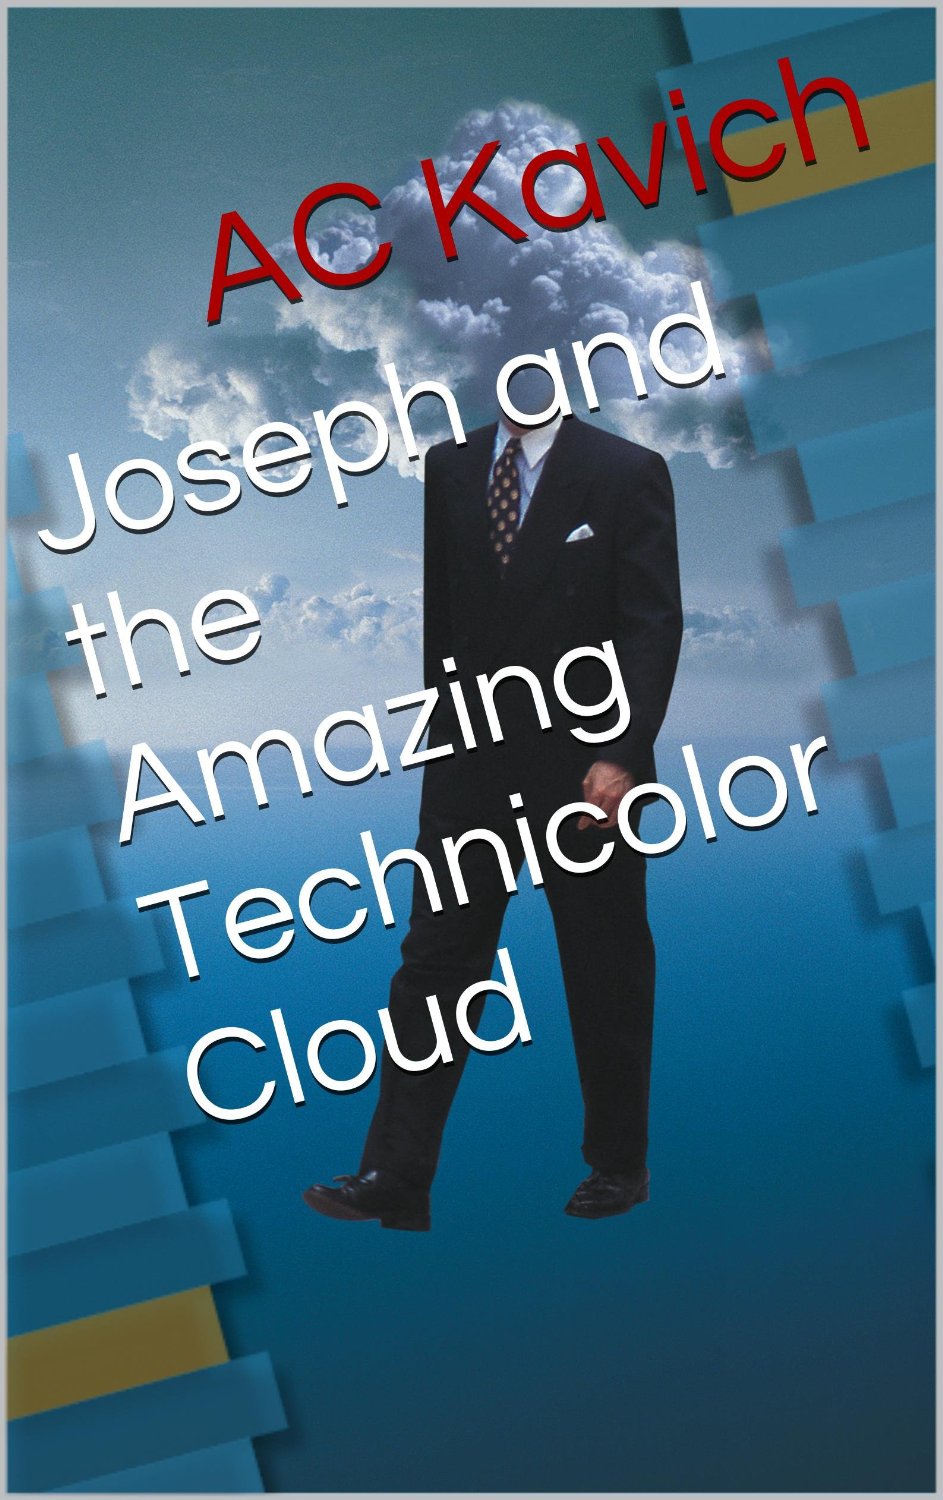 Joseph and the Amazing Technicolor Cloud by AC Kavich